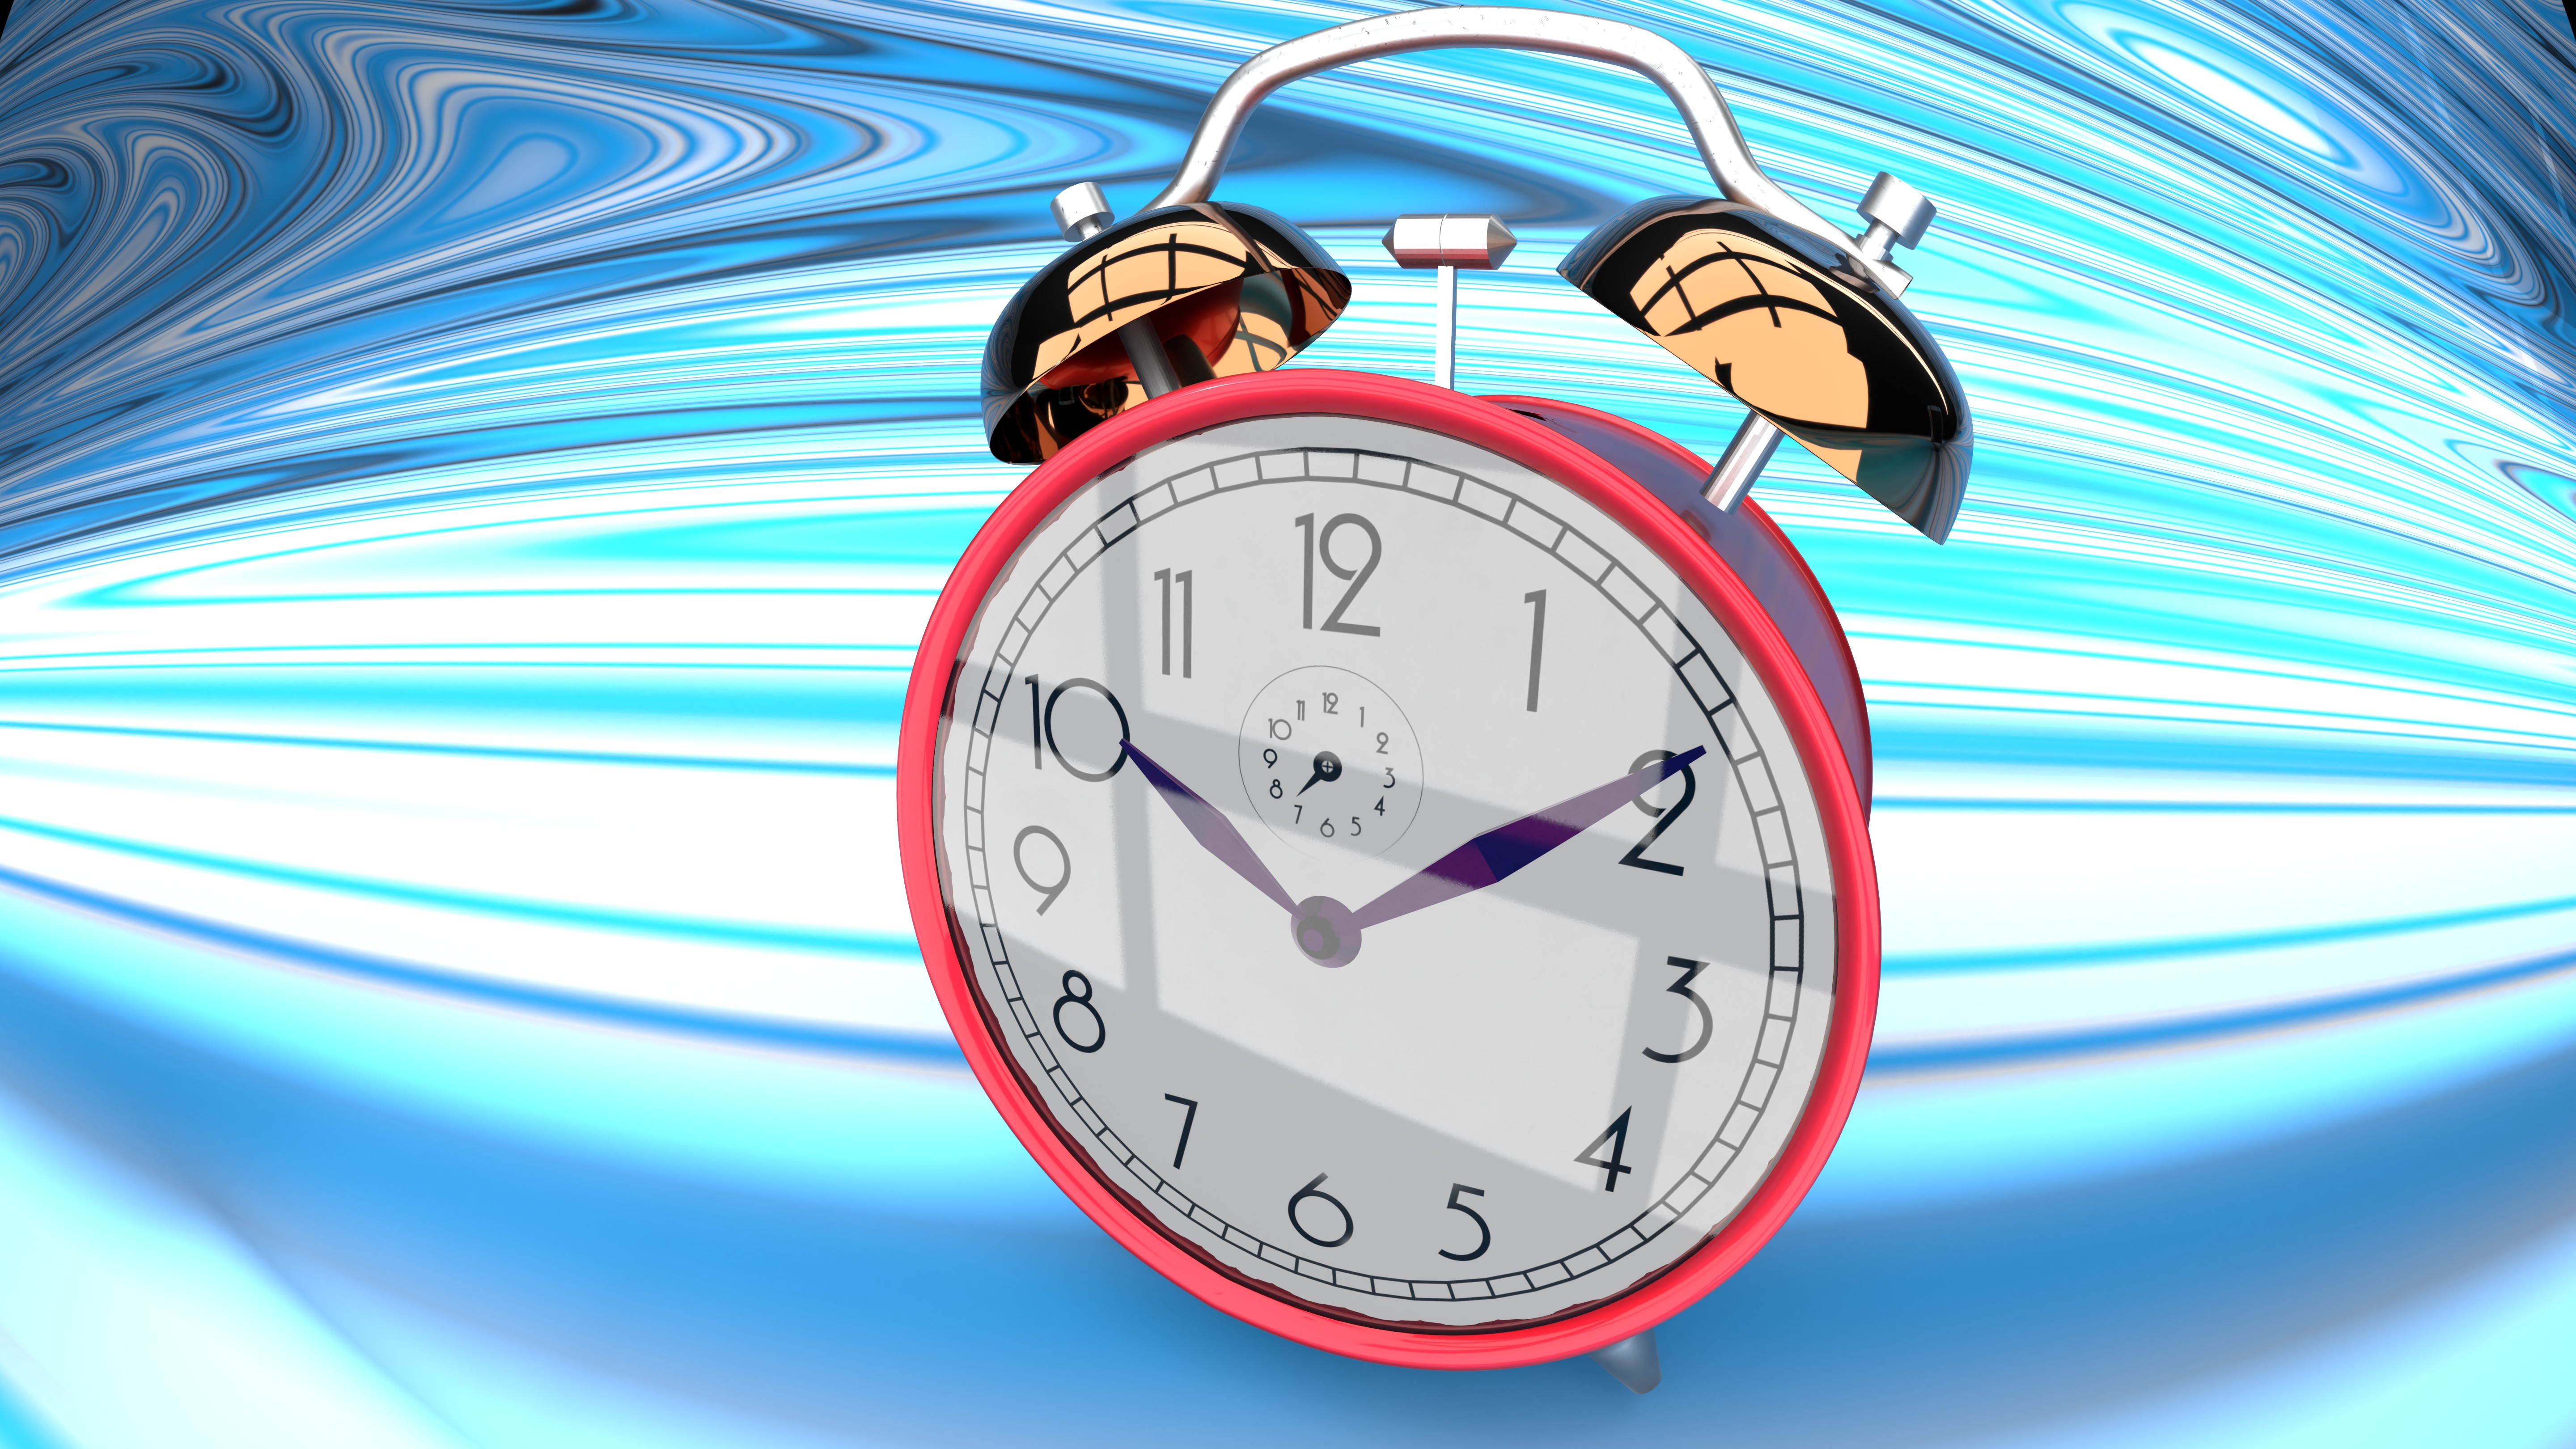 Why Do Humans Perceive Time The Way We Do?